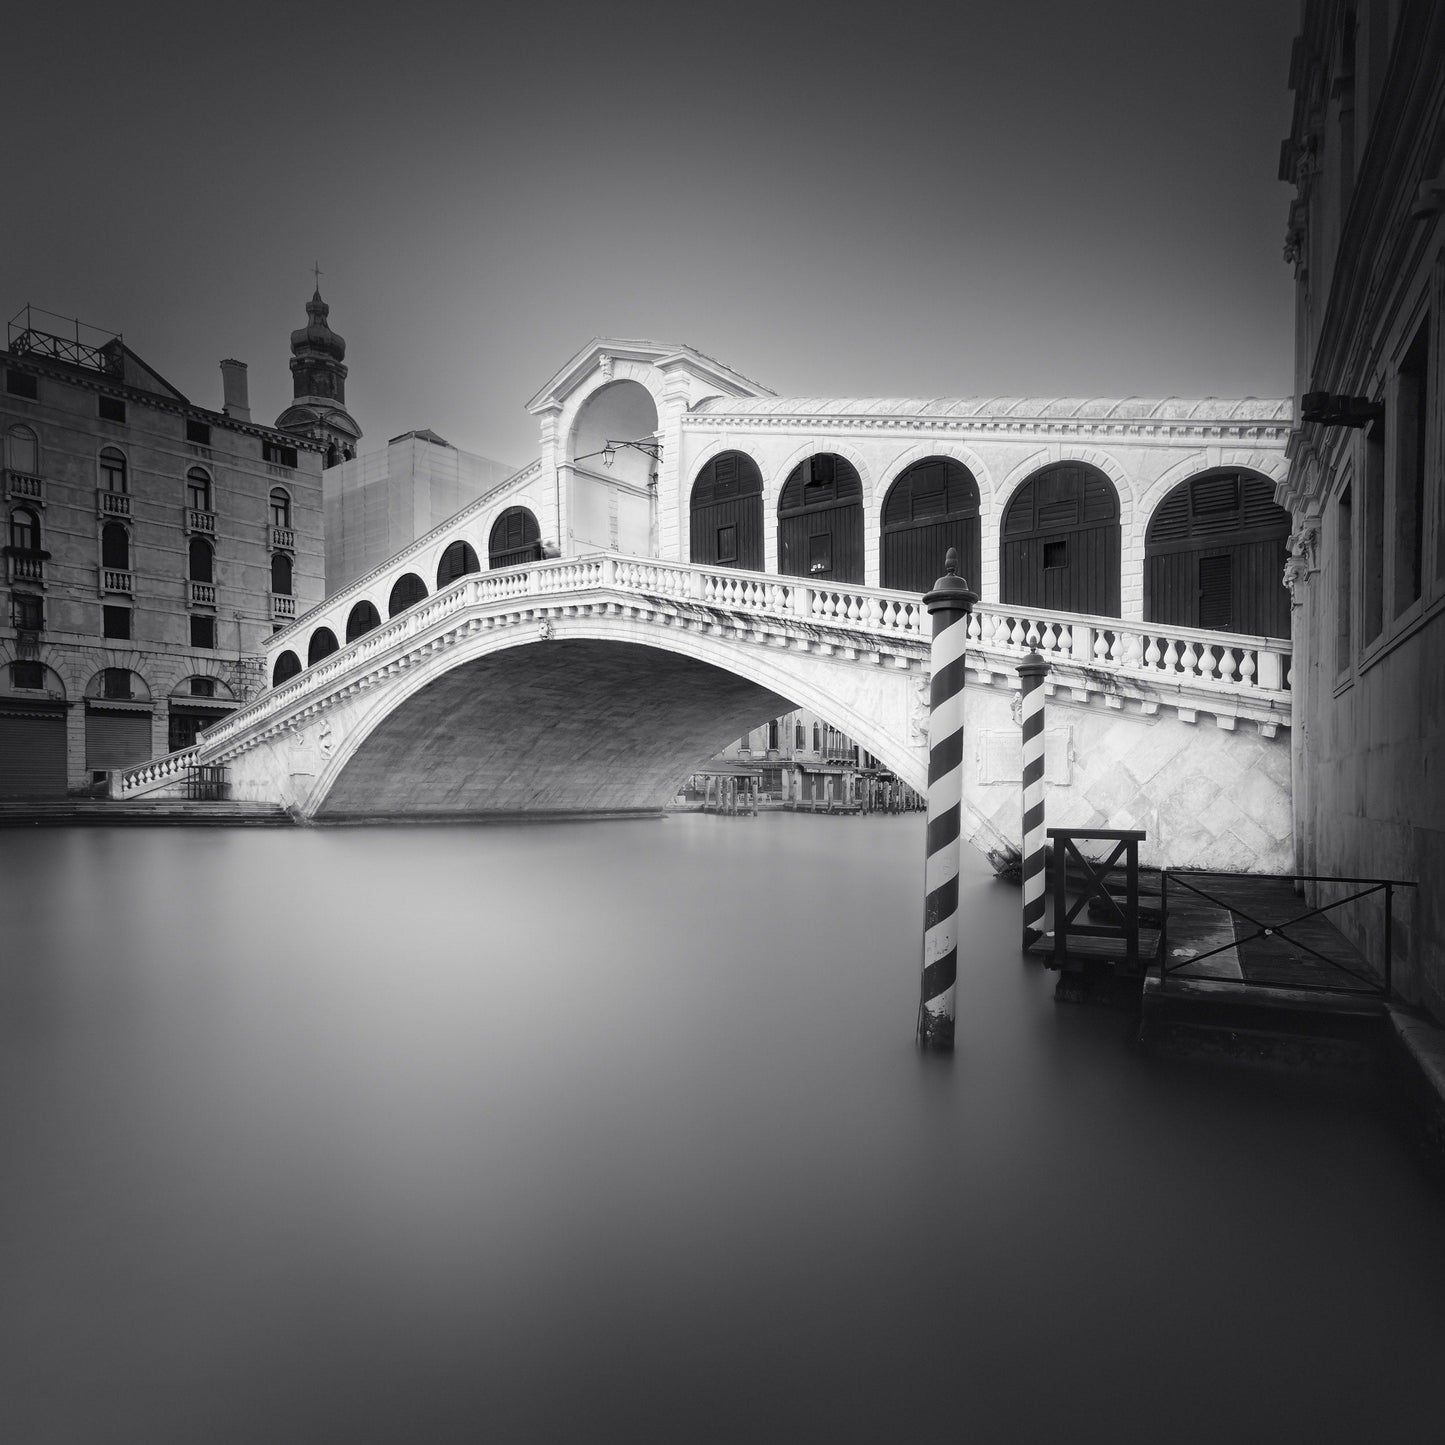 The artpiece 'Ponte di Rialto' by Marco Maljaars shows the famous bridge in Venice with serene quiet waters underneath in a beautiful black and white image.